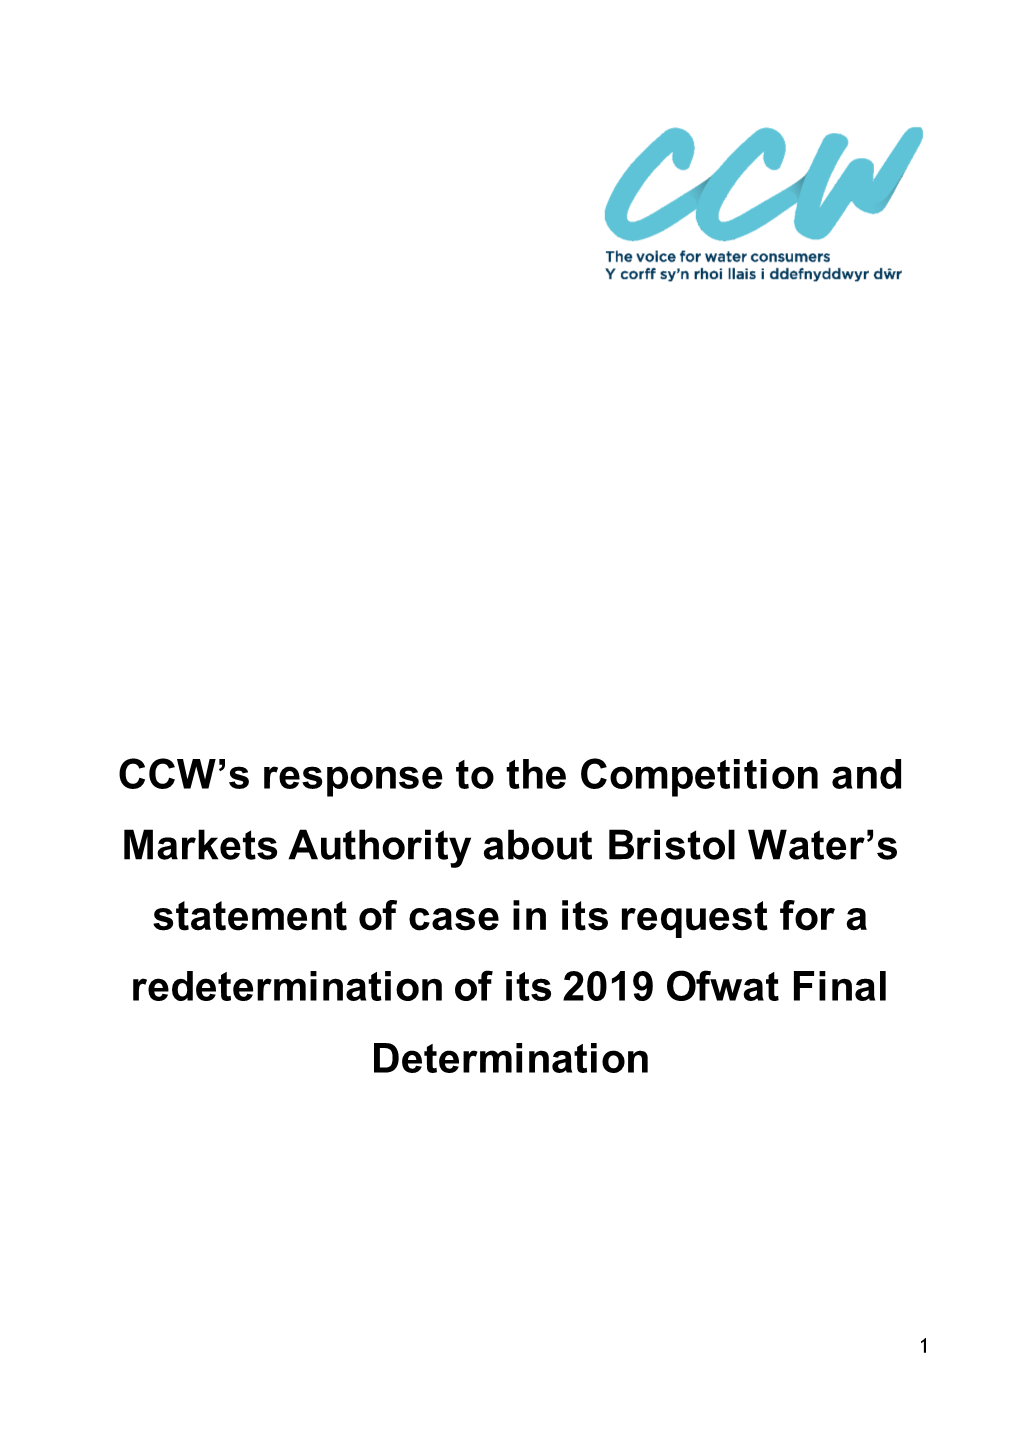 CCW's Response to the Competition and Markets Authority About Bristol